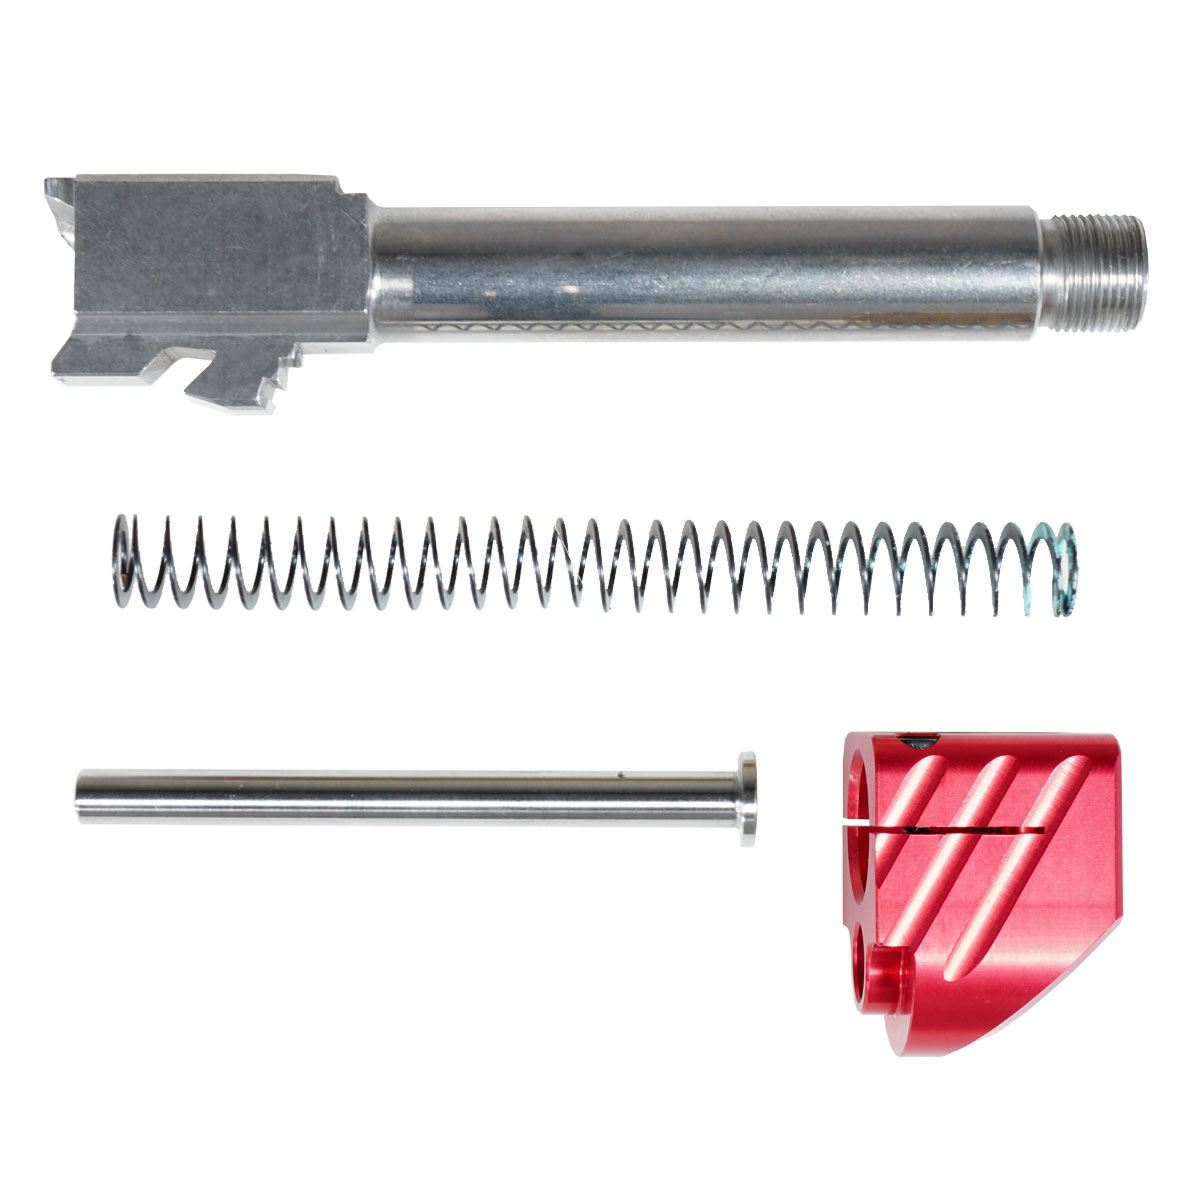 Upgrade Your Glock Kit: Davidson Defense Glock Compensator 6061 Aluminum, Anodized Type 2 Red Single port comp 1/2x28 with clamping set screws  + ELD Performance Glock 19 Compatible 9mm Stainless Steel Threaded Barrel